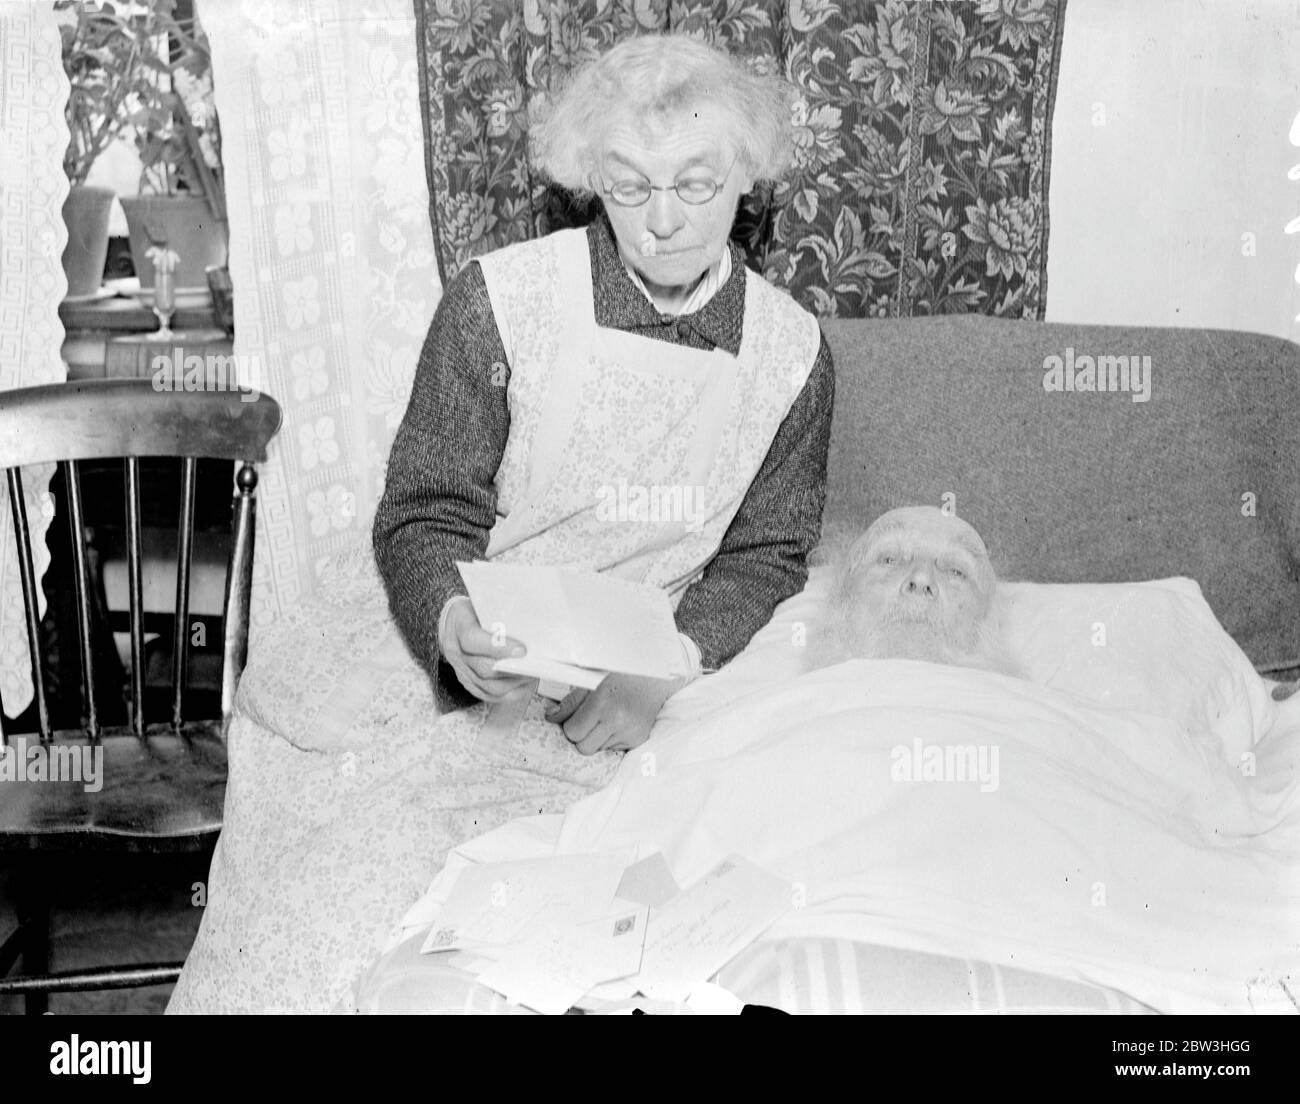 Mr William Lecey of Bennett ' s Cottages Capel , near Dorking is celebrating his hundred and second birthday . He is bed ridden , but not feeble and he complains because he is not able to shave himself . Photo shows Mr Lecey listening to messages of congratulations being read by his daughter , Miss Sarah Lecey .  9 February 1935 Stock Photo